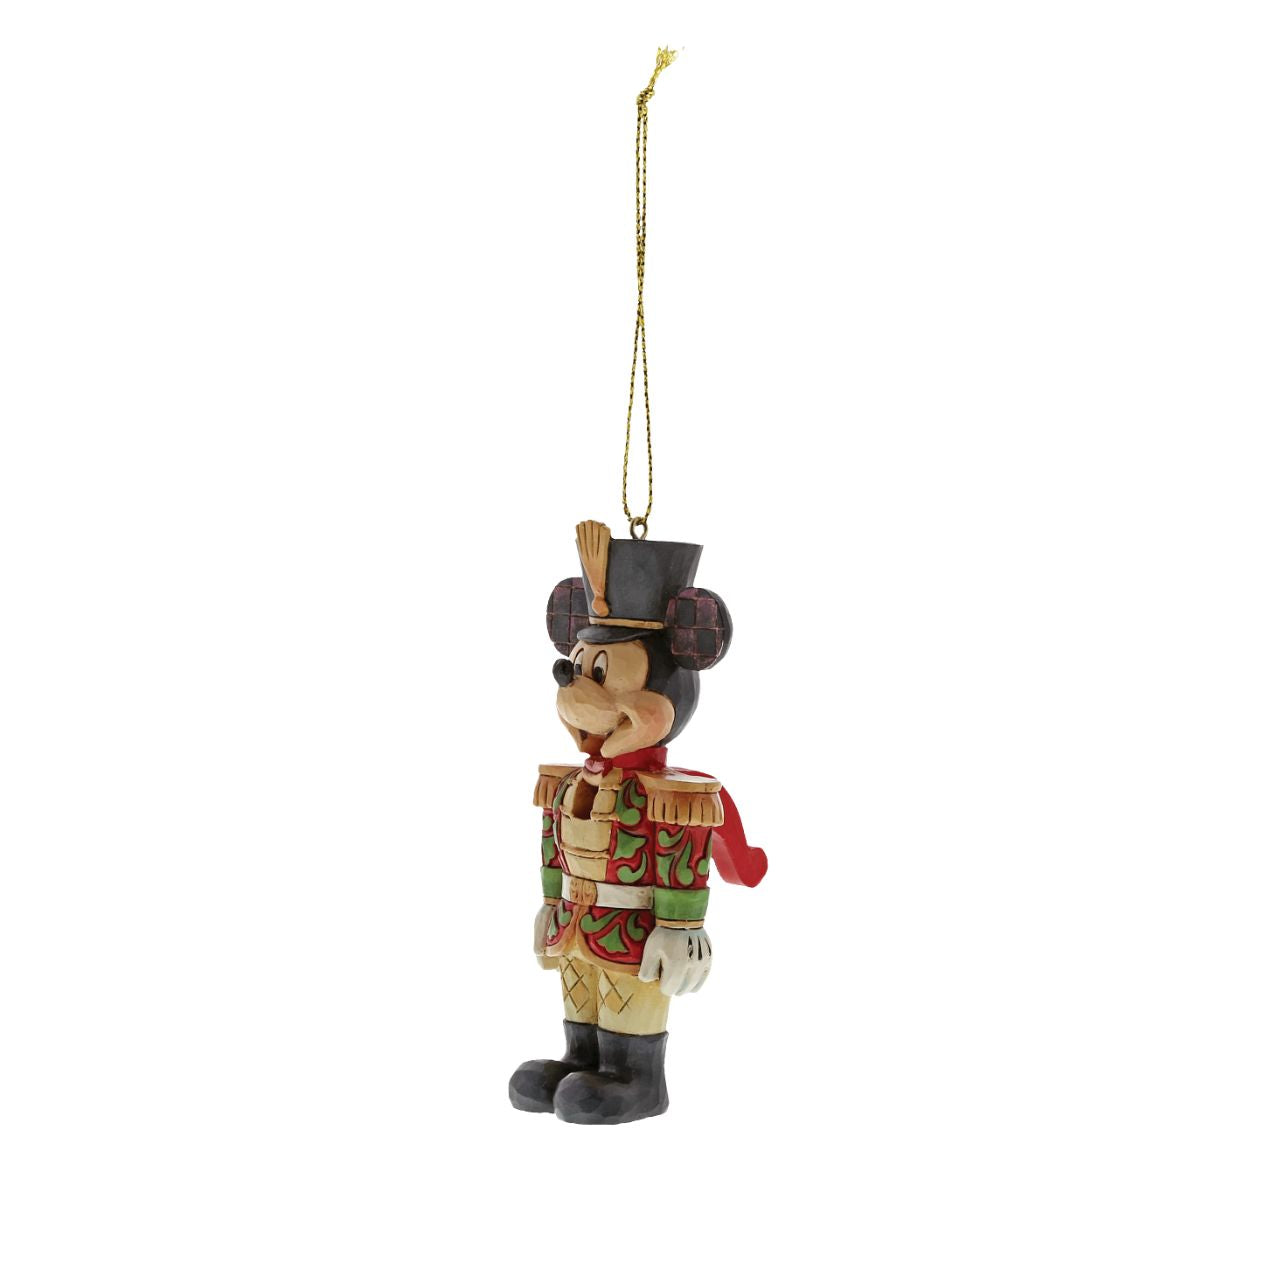 Jim Shore Mickey Mouse Nutcracker Christmas Hanging Ornament  Mickey Mouse is ready to make his debut in the Christmas classic, The Nutcracker. Handcrafted and hand-painted, this timeless ornament features Jim Shore's signature folk art motifs and playful use of colour.